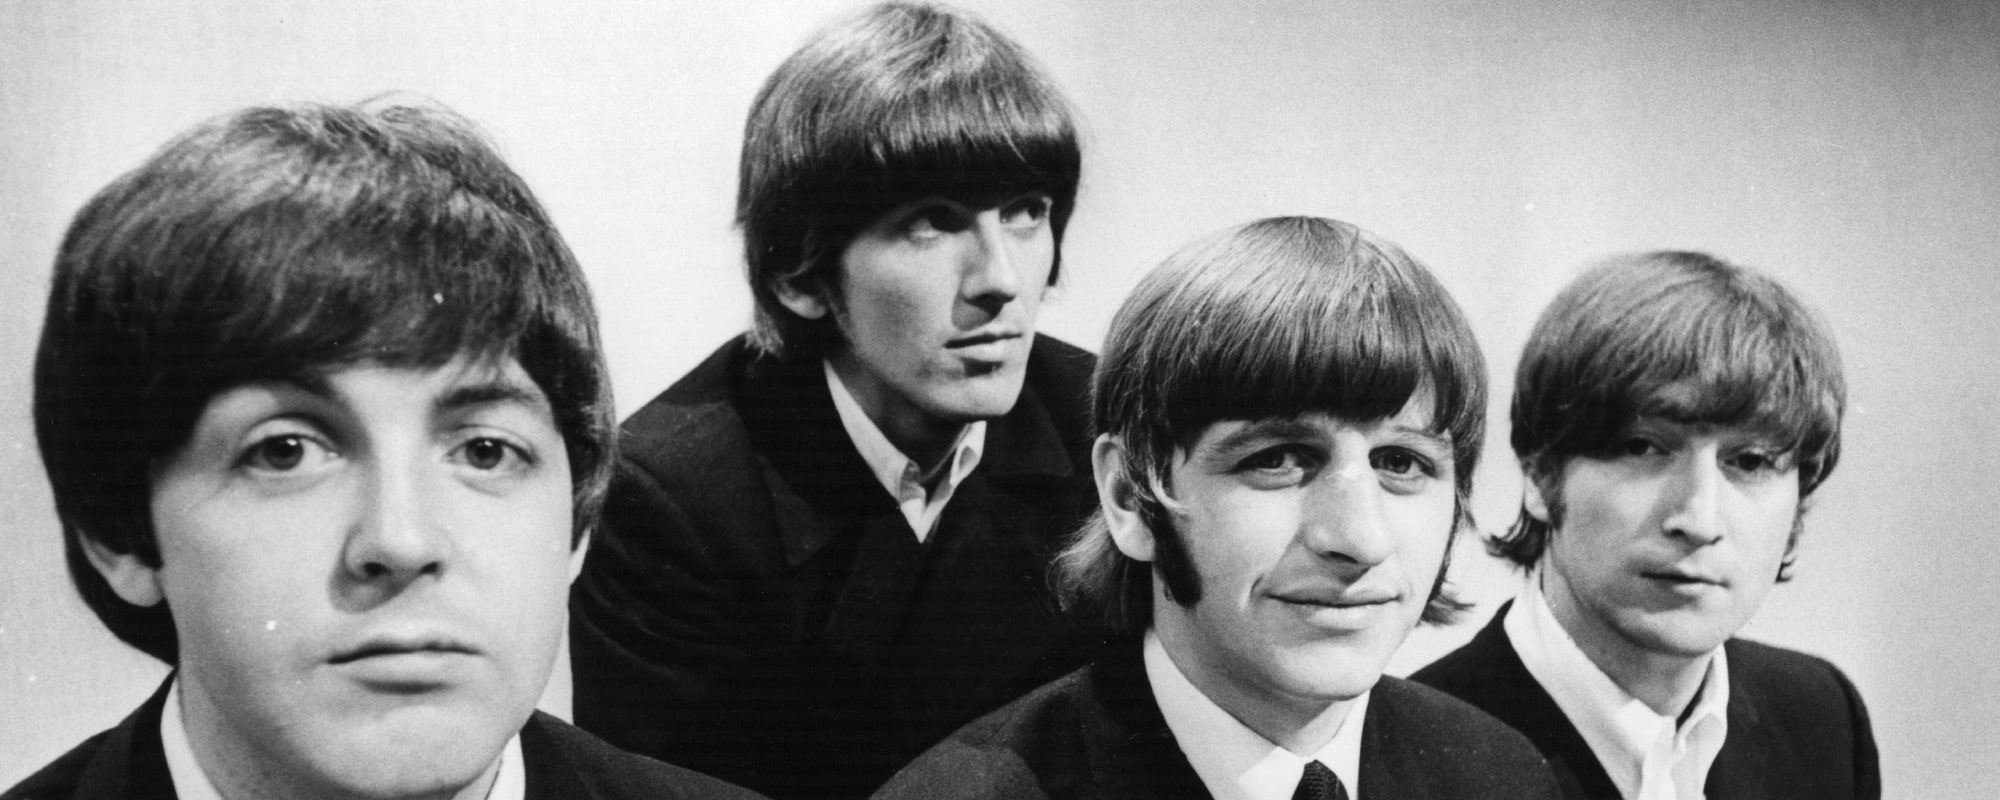 The Beatles End 53-Year Drought By Notching No. 1 Spot on Airplay Chart